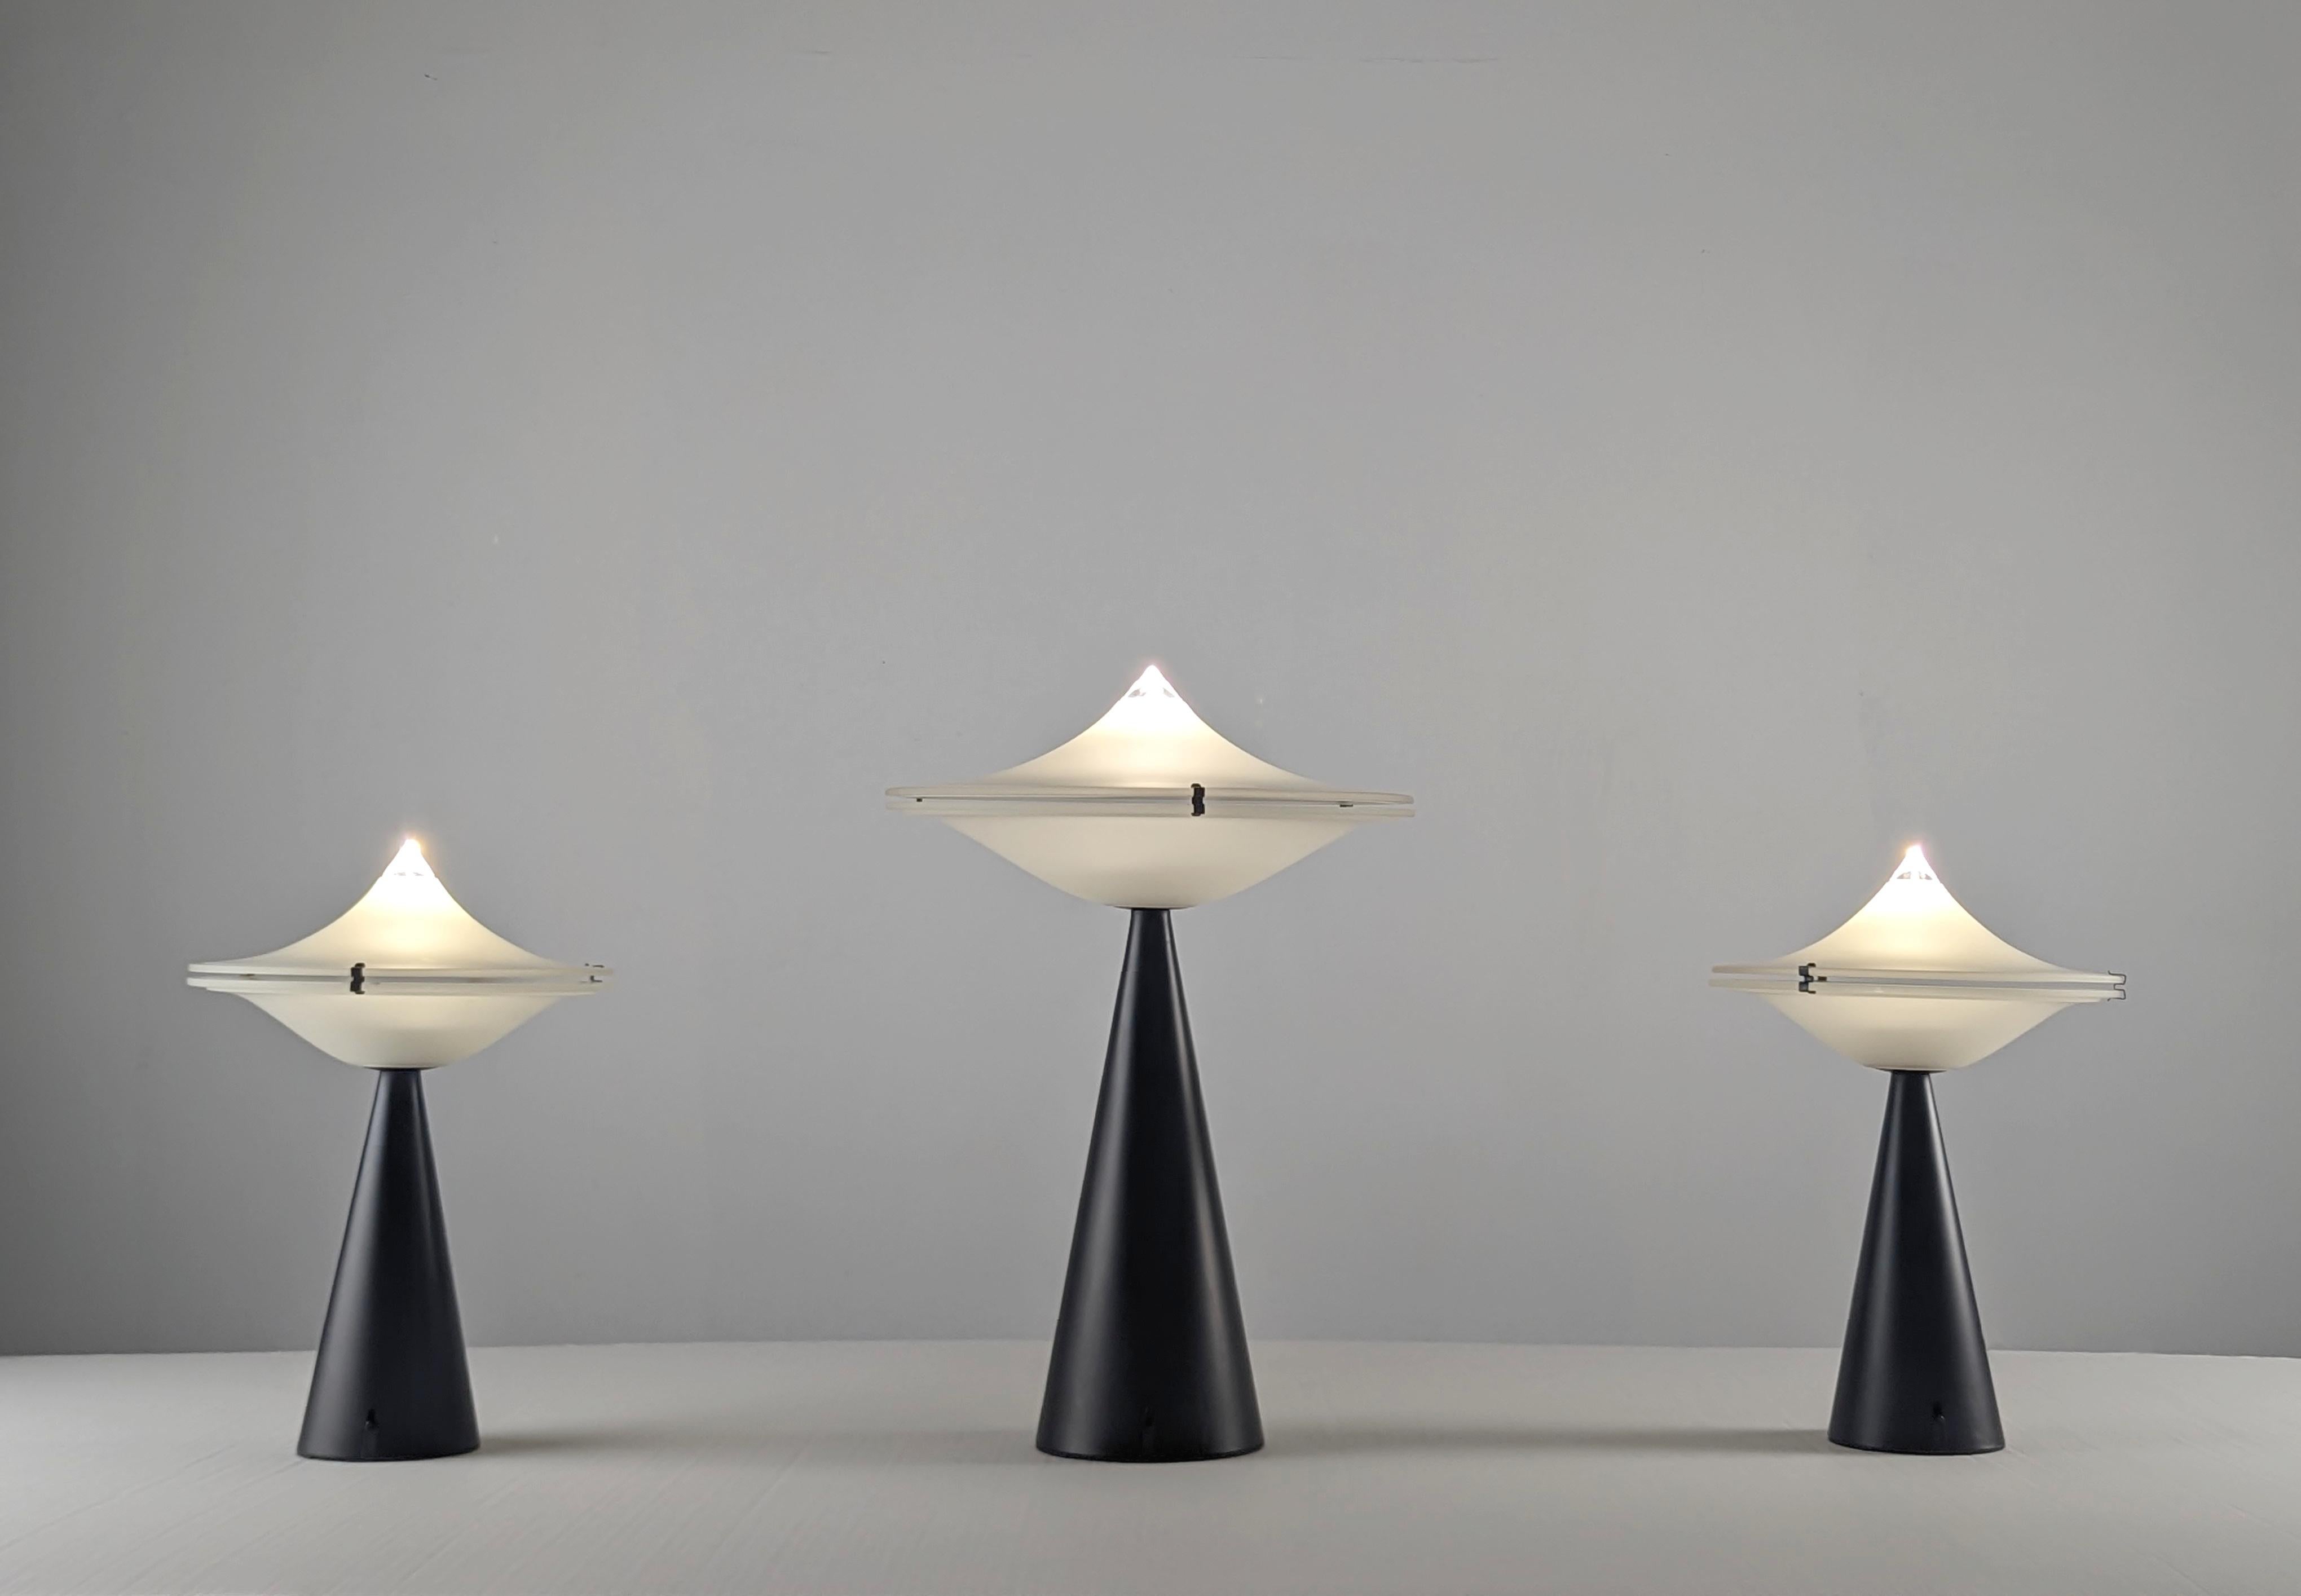 Beautiful set of three Alien lamps designed by Cesaro L. made with a black metal base and two elegant glass pieces on top. This set is made up of the two models that Cesaro created in 1975, two units of the small version and one of the large